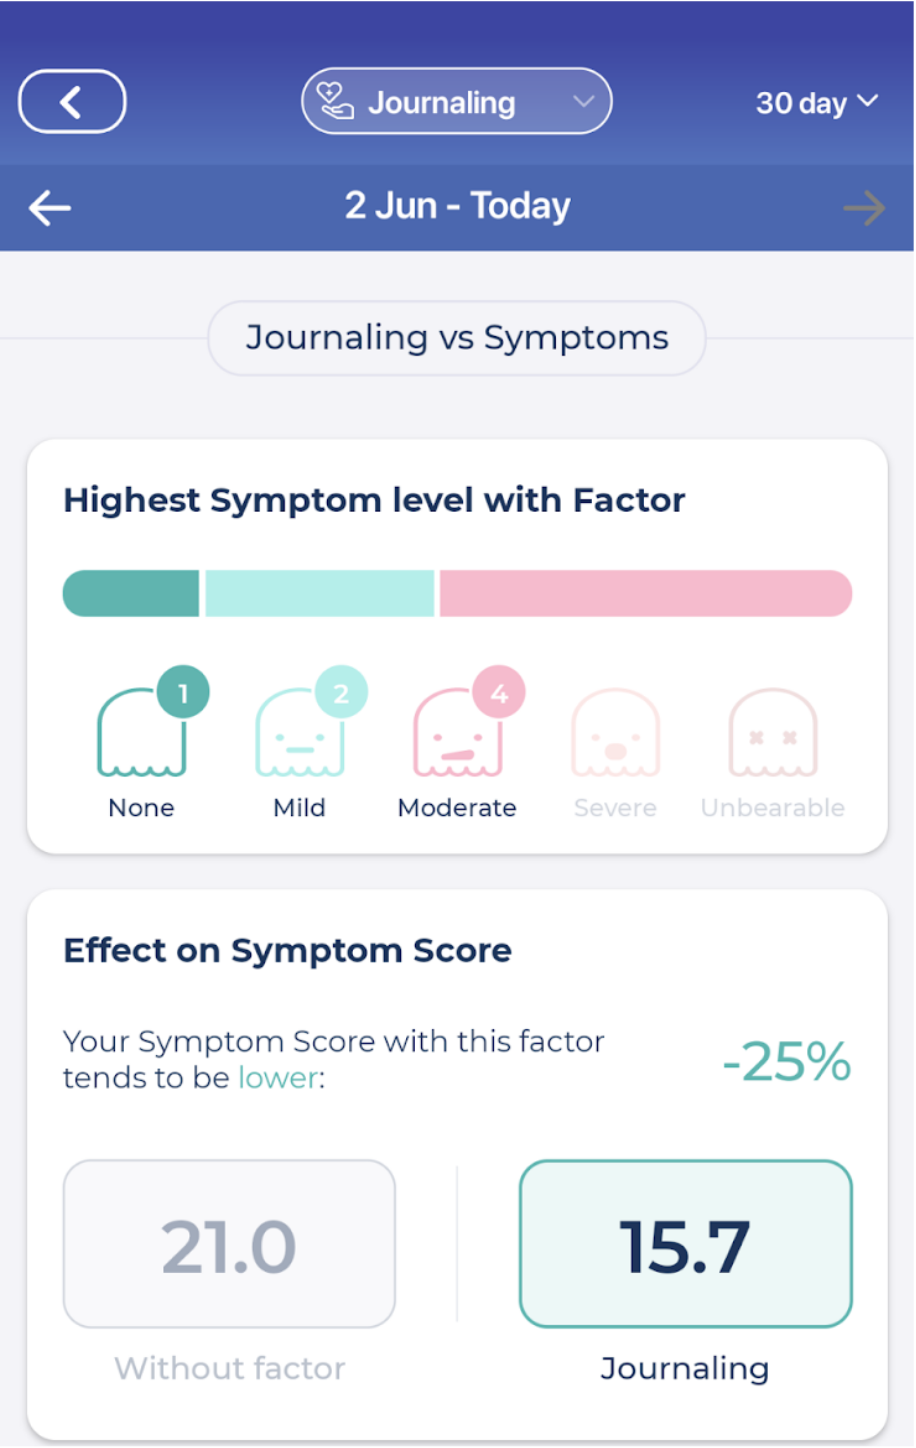 The overall effect of journaling on my health